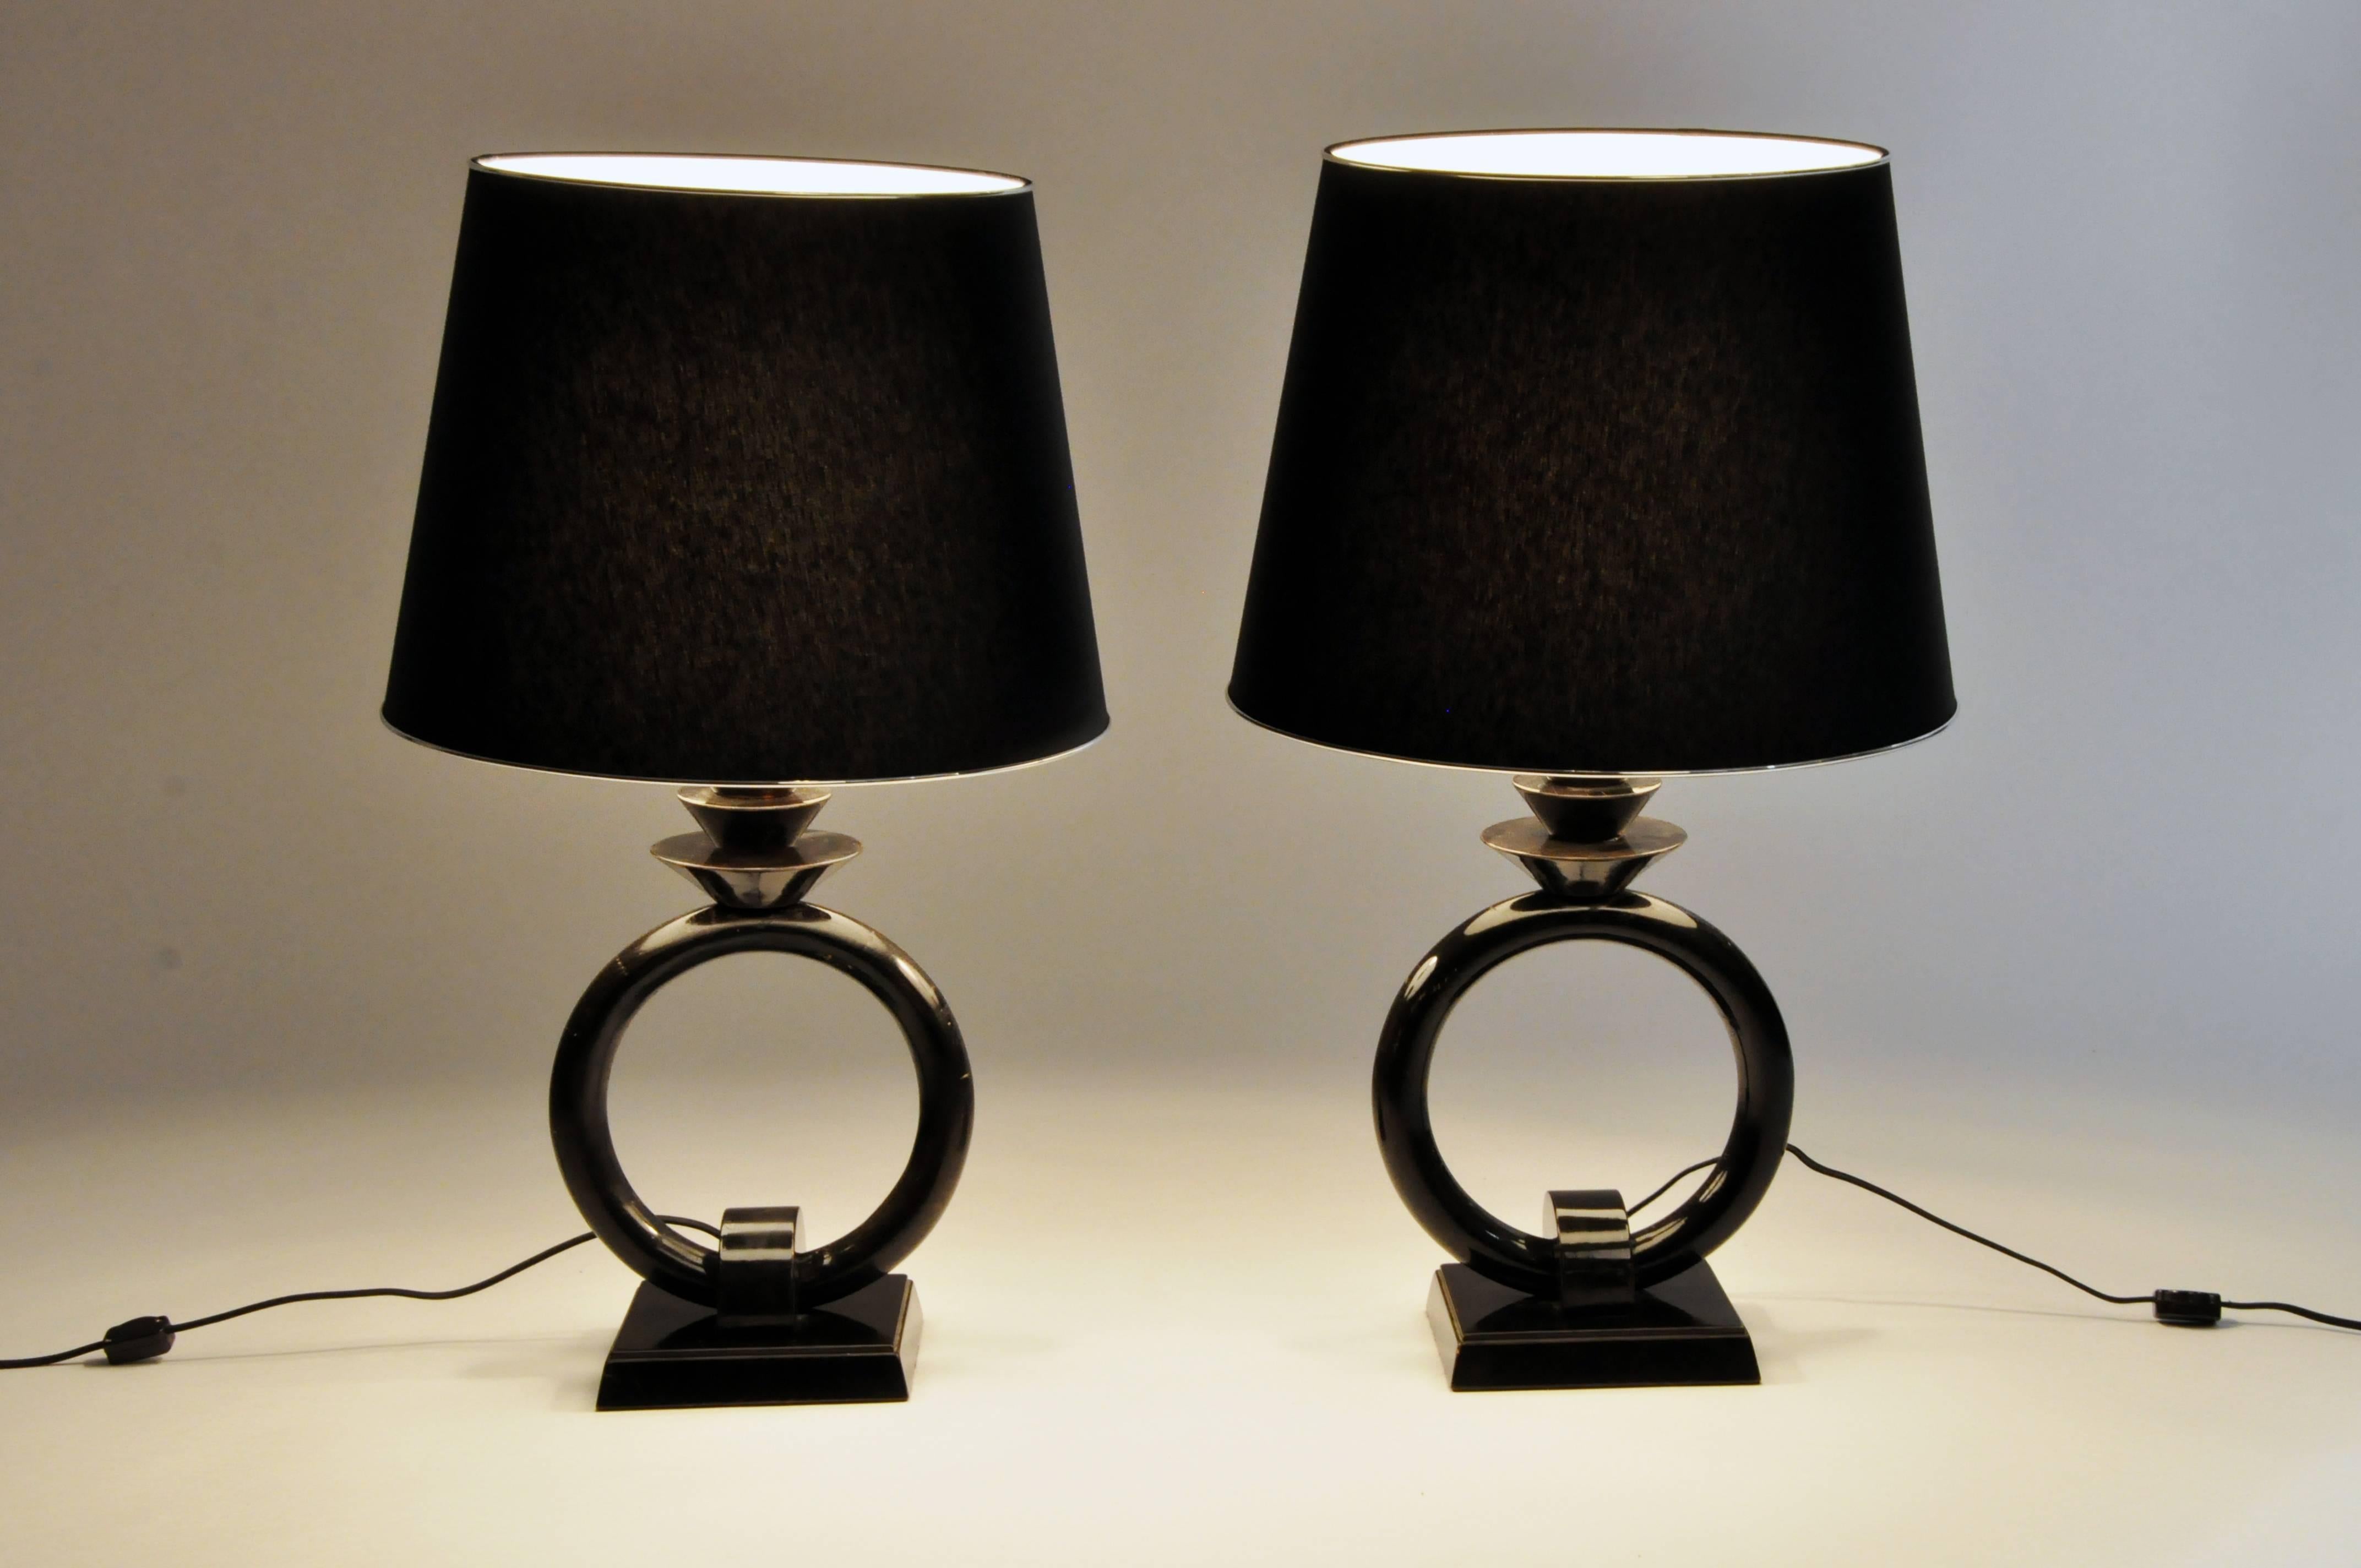 This handsome Mid-Century pair of lamps is from Budapest, Hungary.